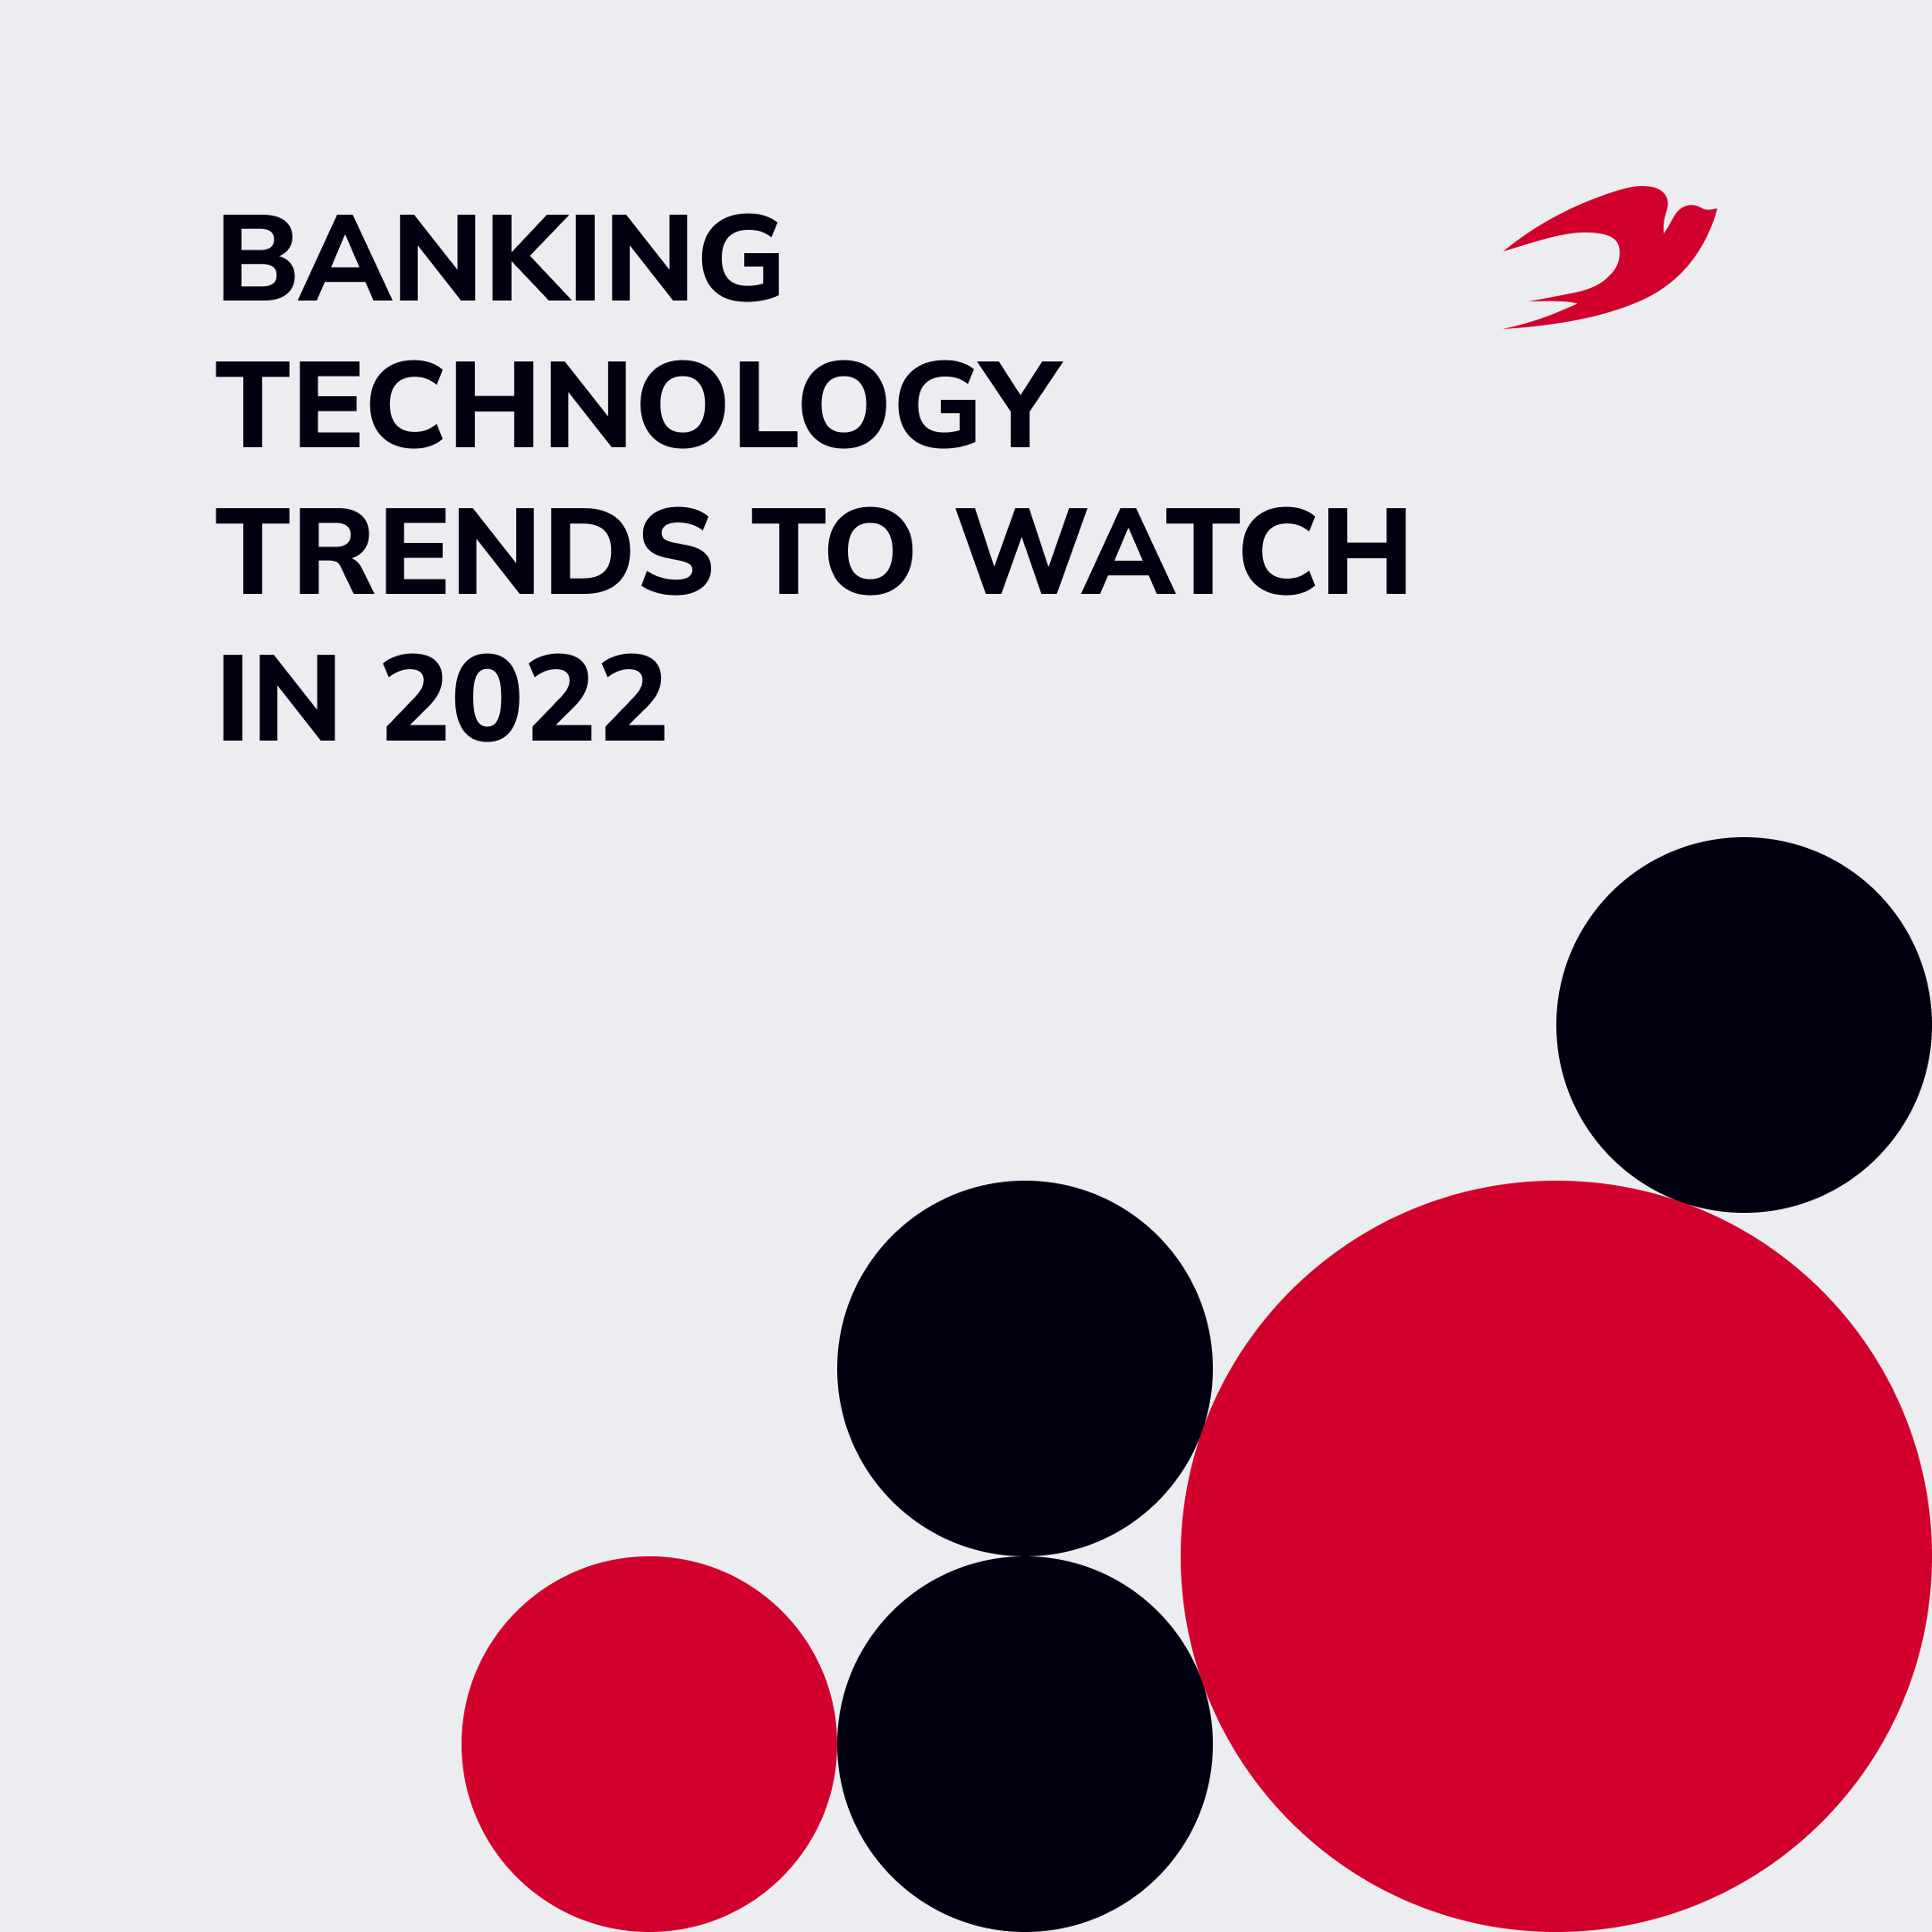 Banking Technology Trends to Watch in 2022